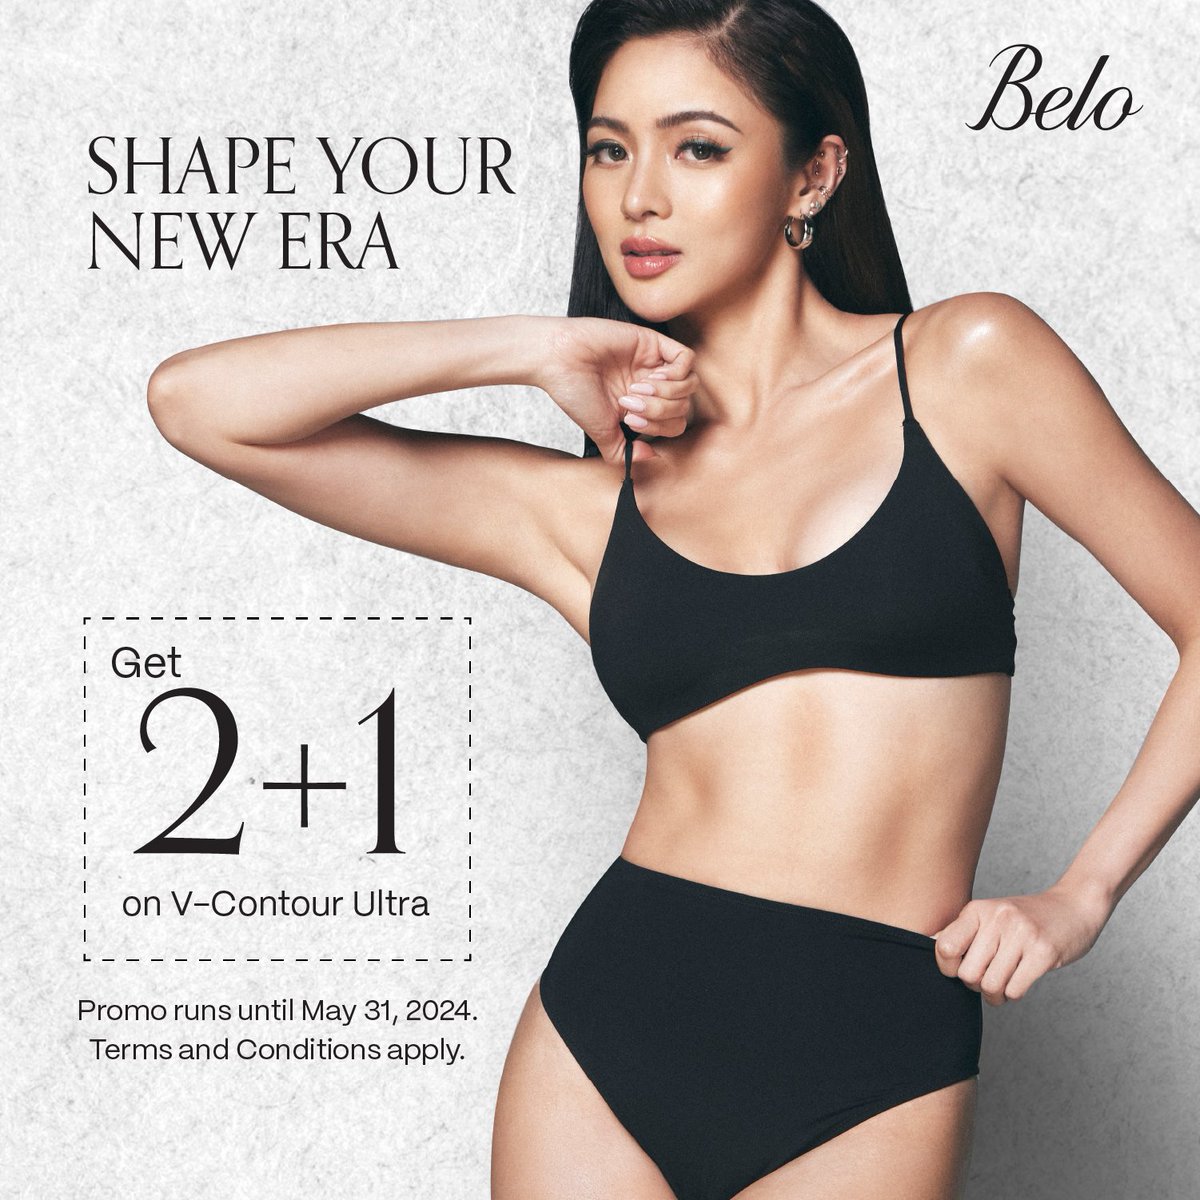 Kim Chiu's transformative journey with #BeloVContourUltra embodies shaping of a new era. Just like Kim, individuals can embark on an era of confidence, shaping a sculpted, contoured, and more empowered future with this 10-15 minute treatment.

#TaftProperties  #BeloVContourUltra